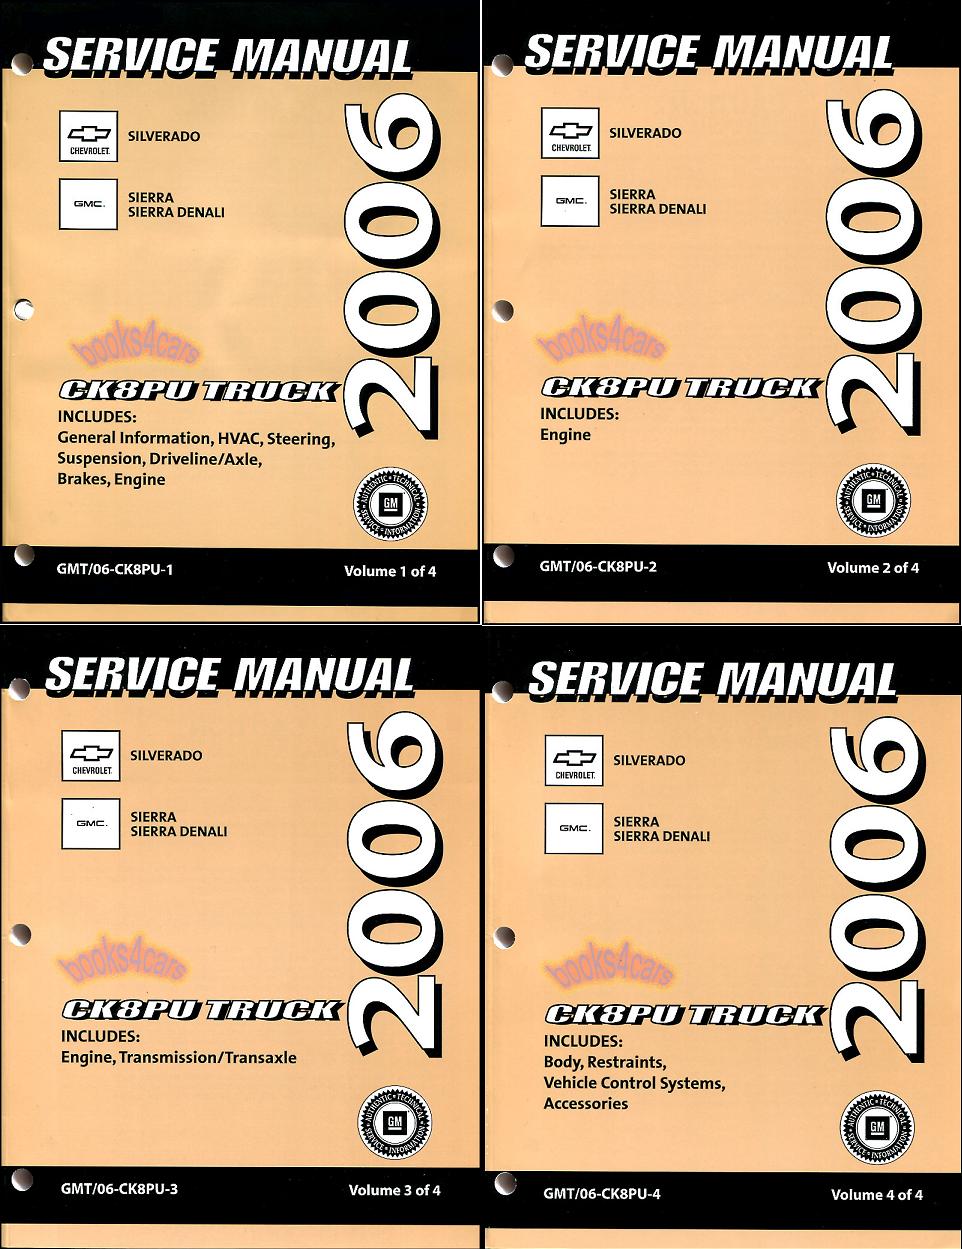 2006 Chevy Silverado and GMC Sierra and Denali shop service repair manual 4 volume set by Chevrolet and GMC Truck CK8